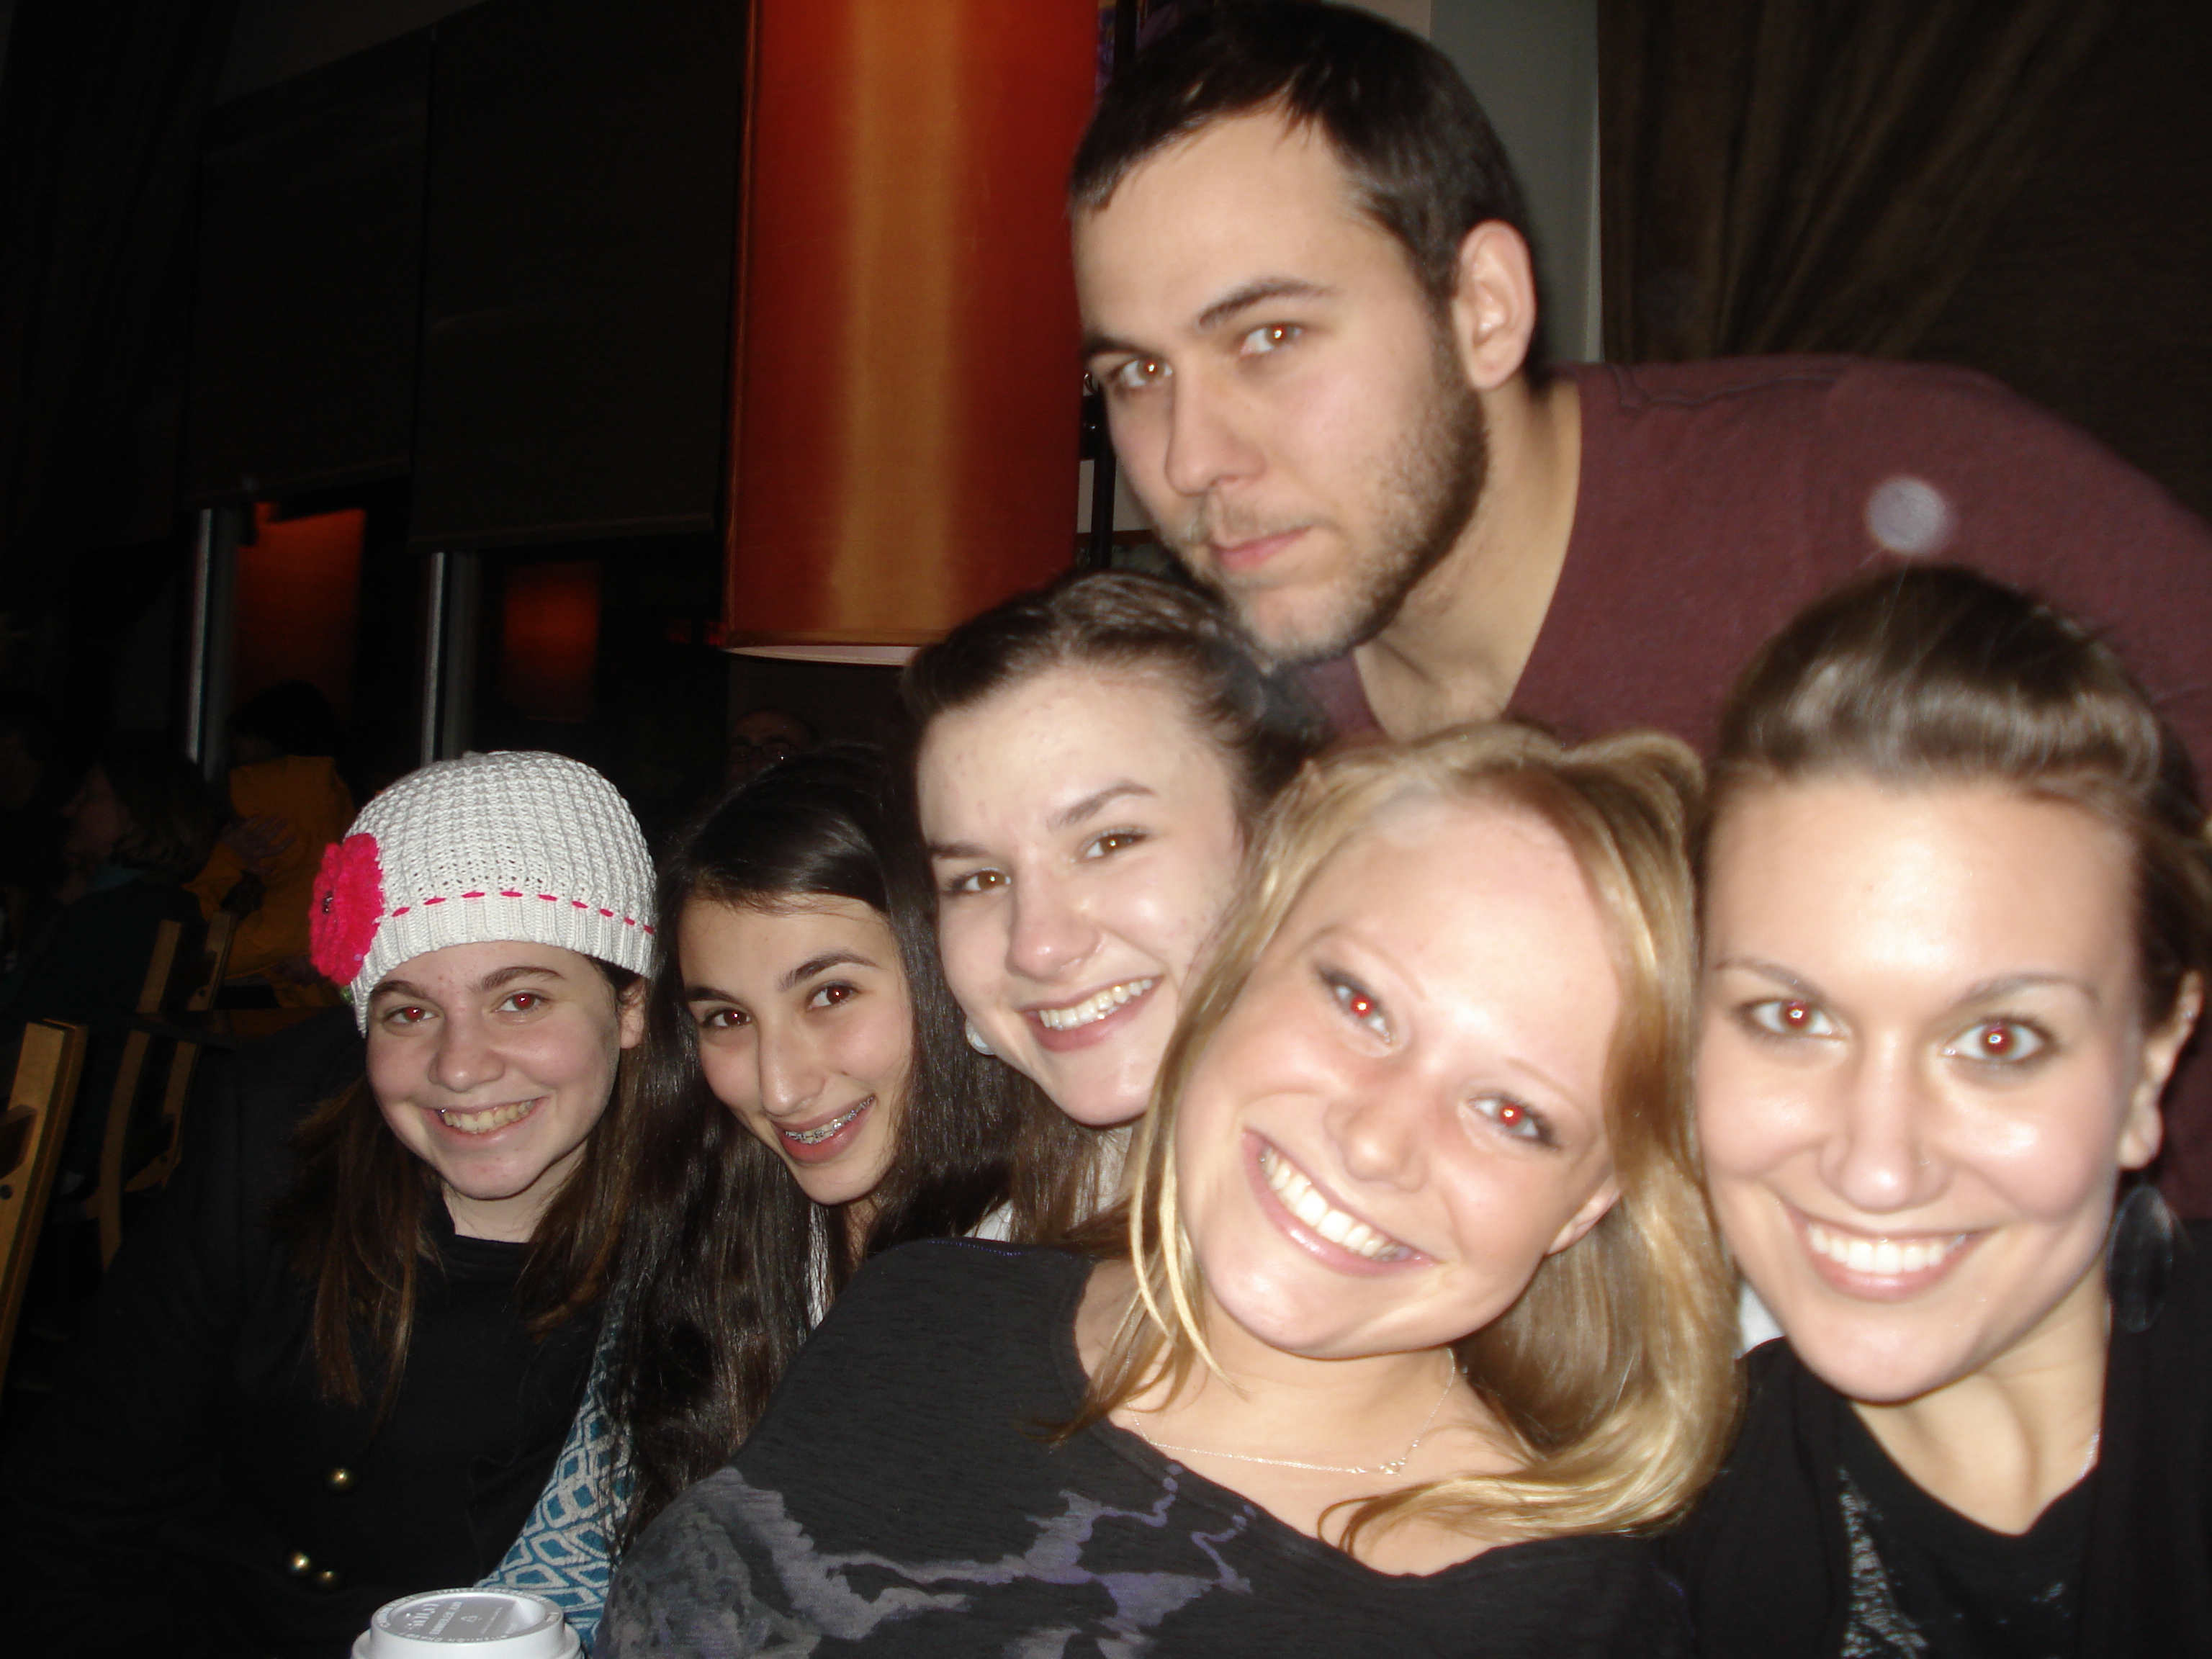 Becky, Danielle, Dani, Liz, and Rachel, visit with Steve before he takes the stage!